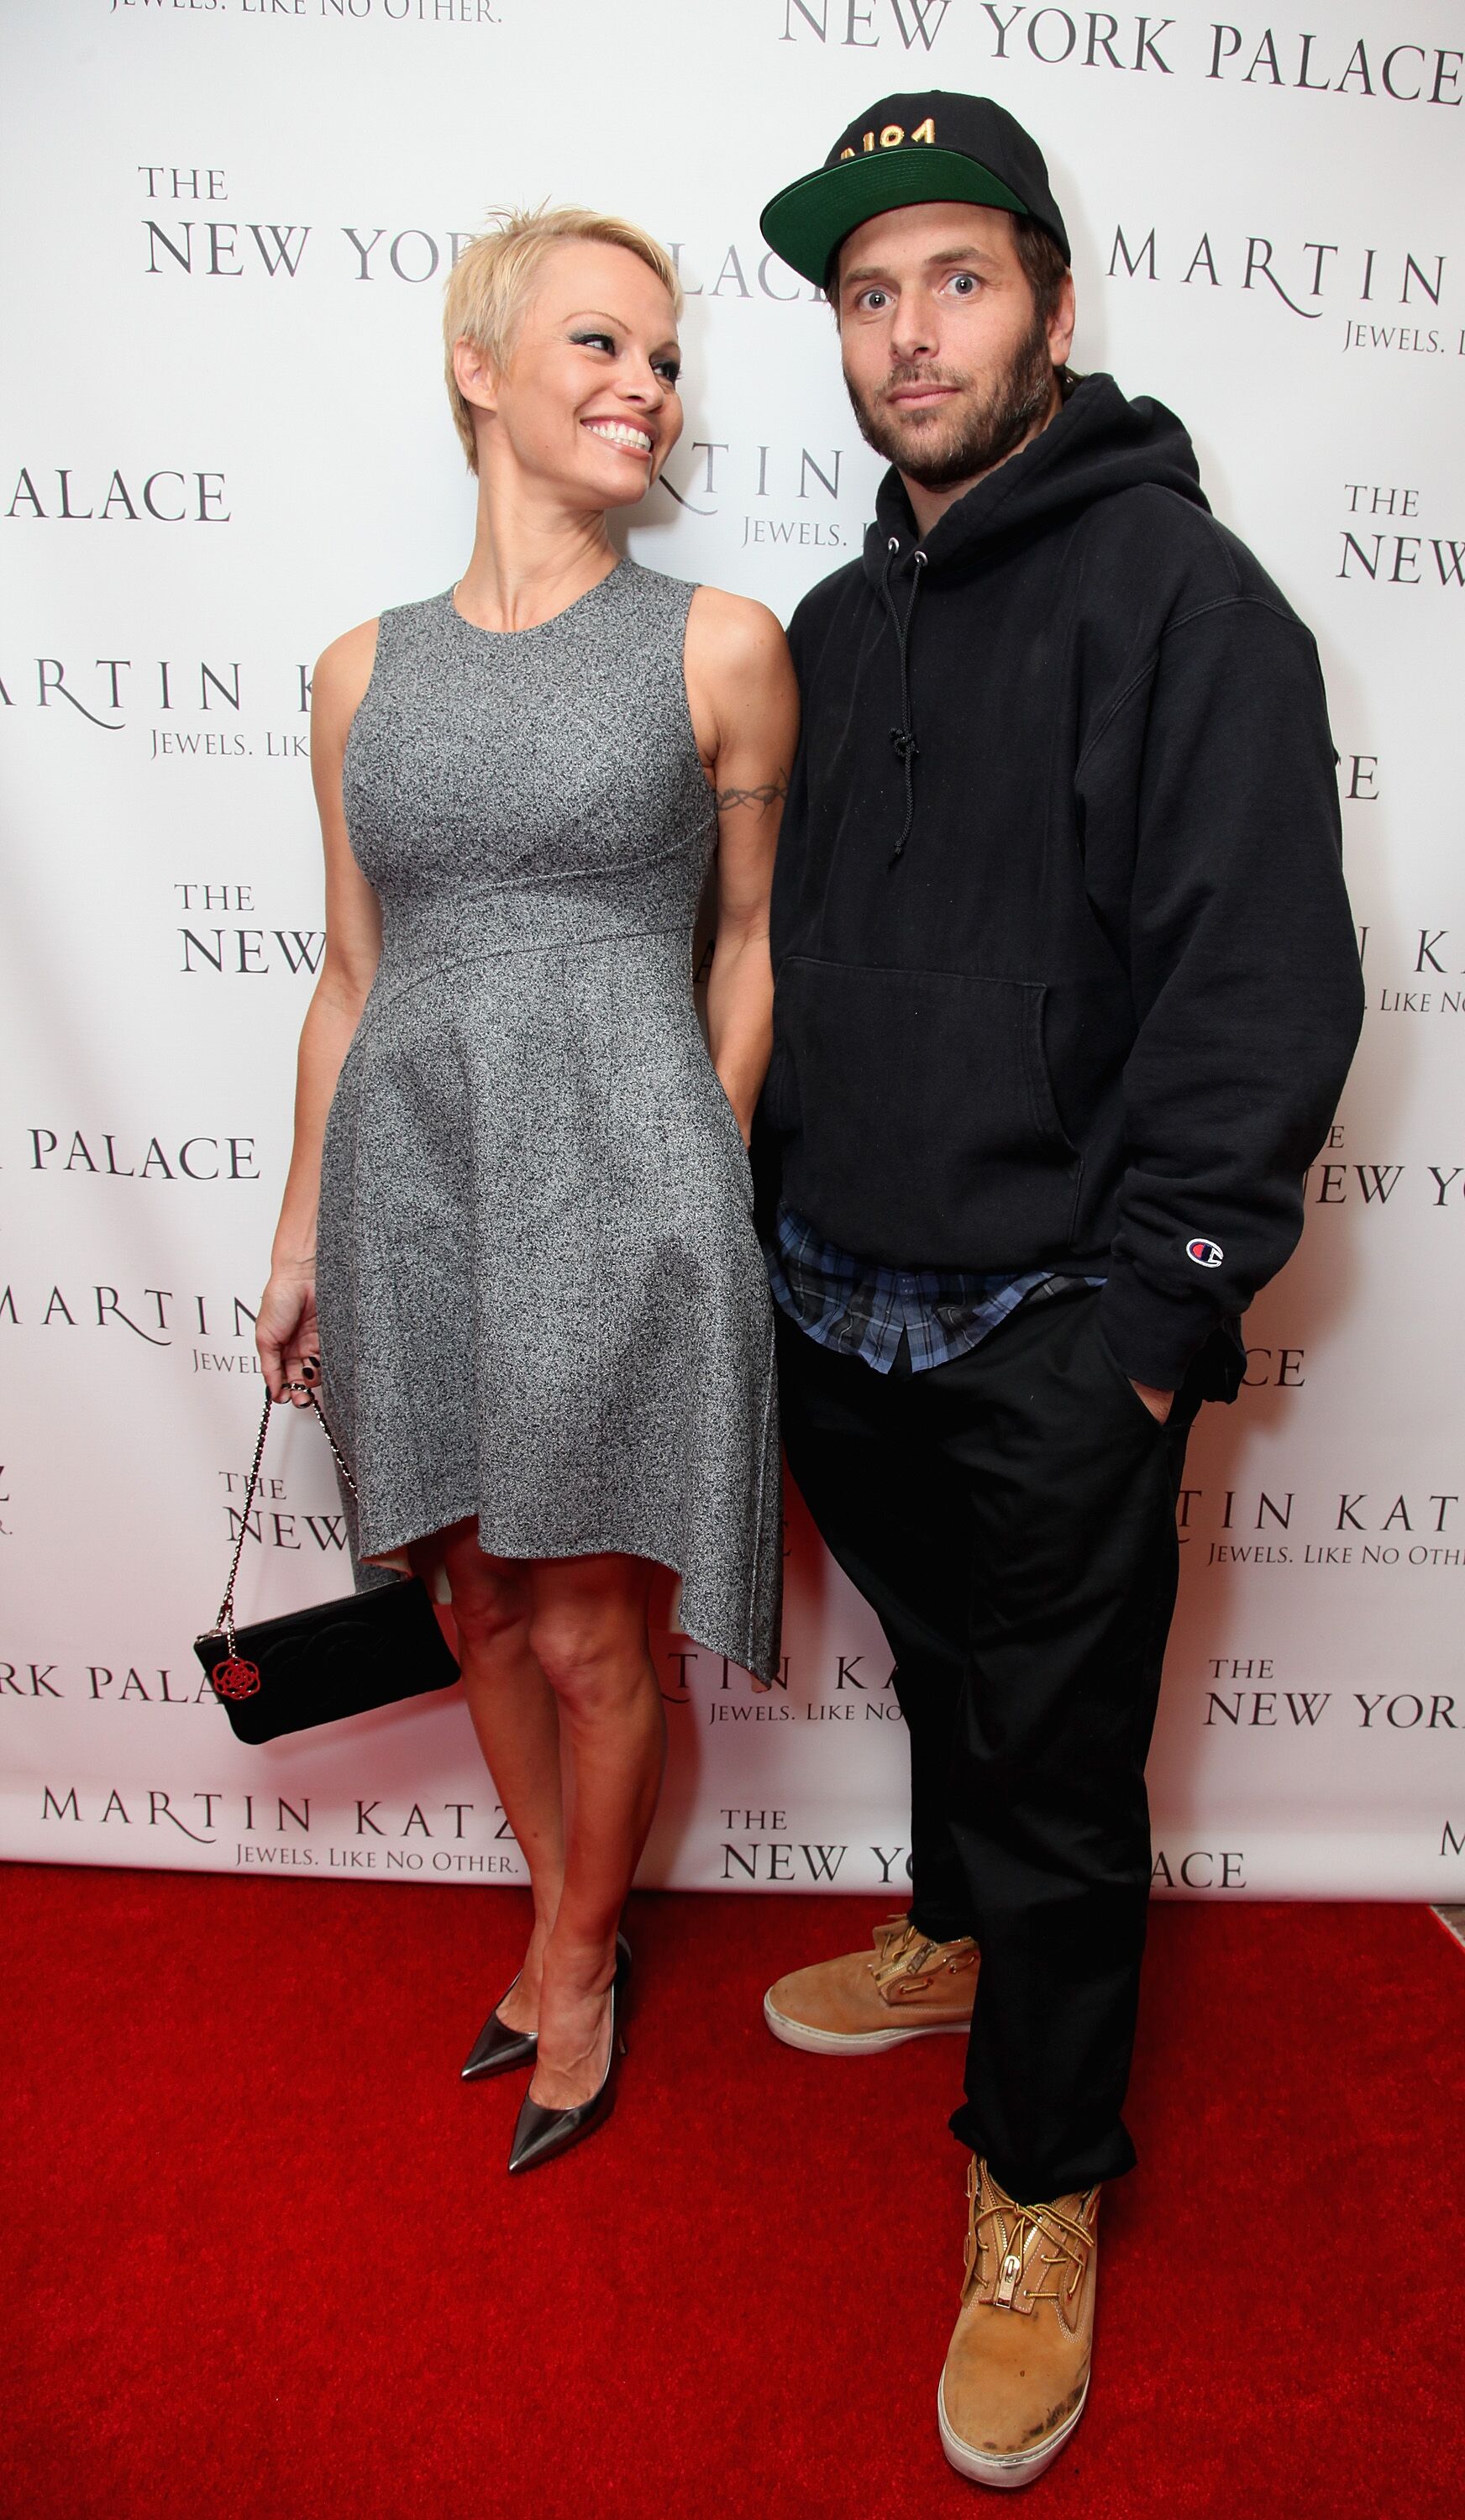 Pamela Anderson and Rick Salomon attend The Martin Katz Jewel Suite Debuts At The New York Palace Hotel. | Source: Getty Images